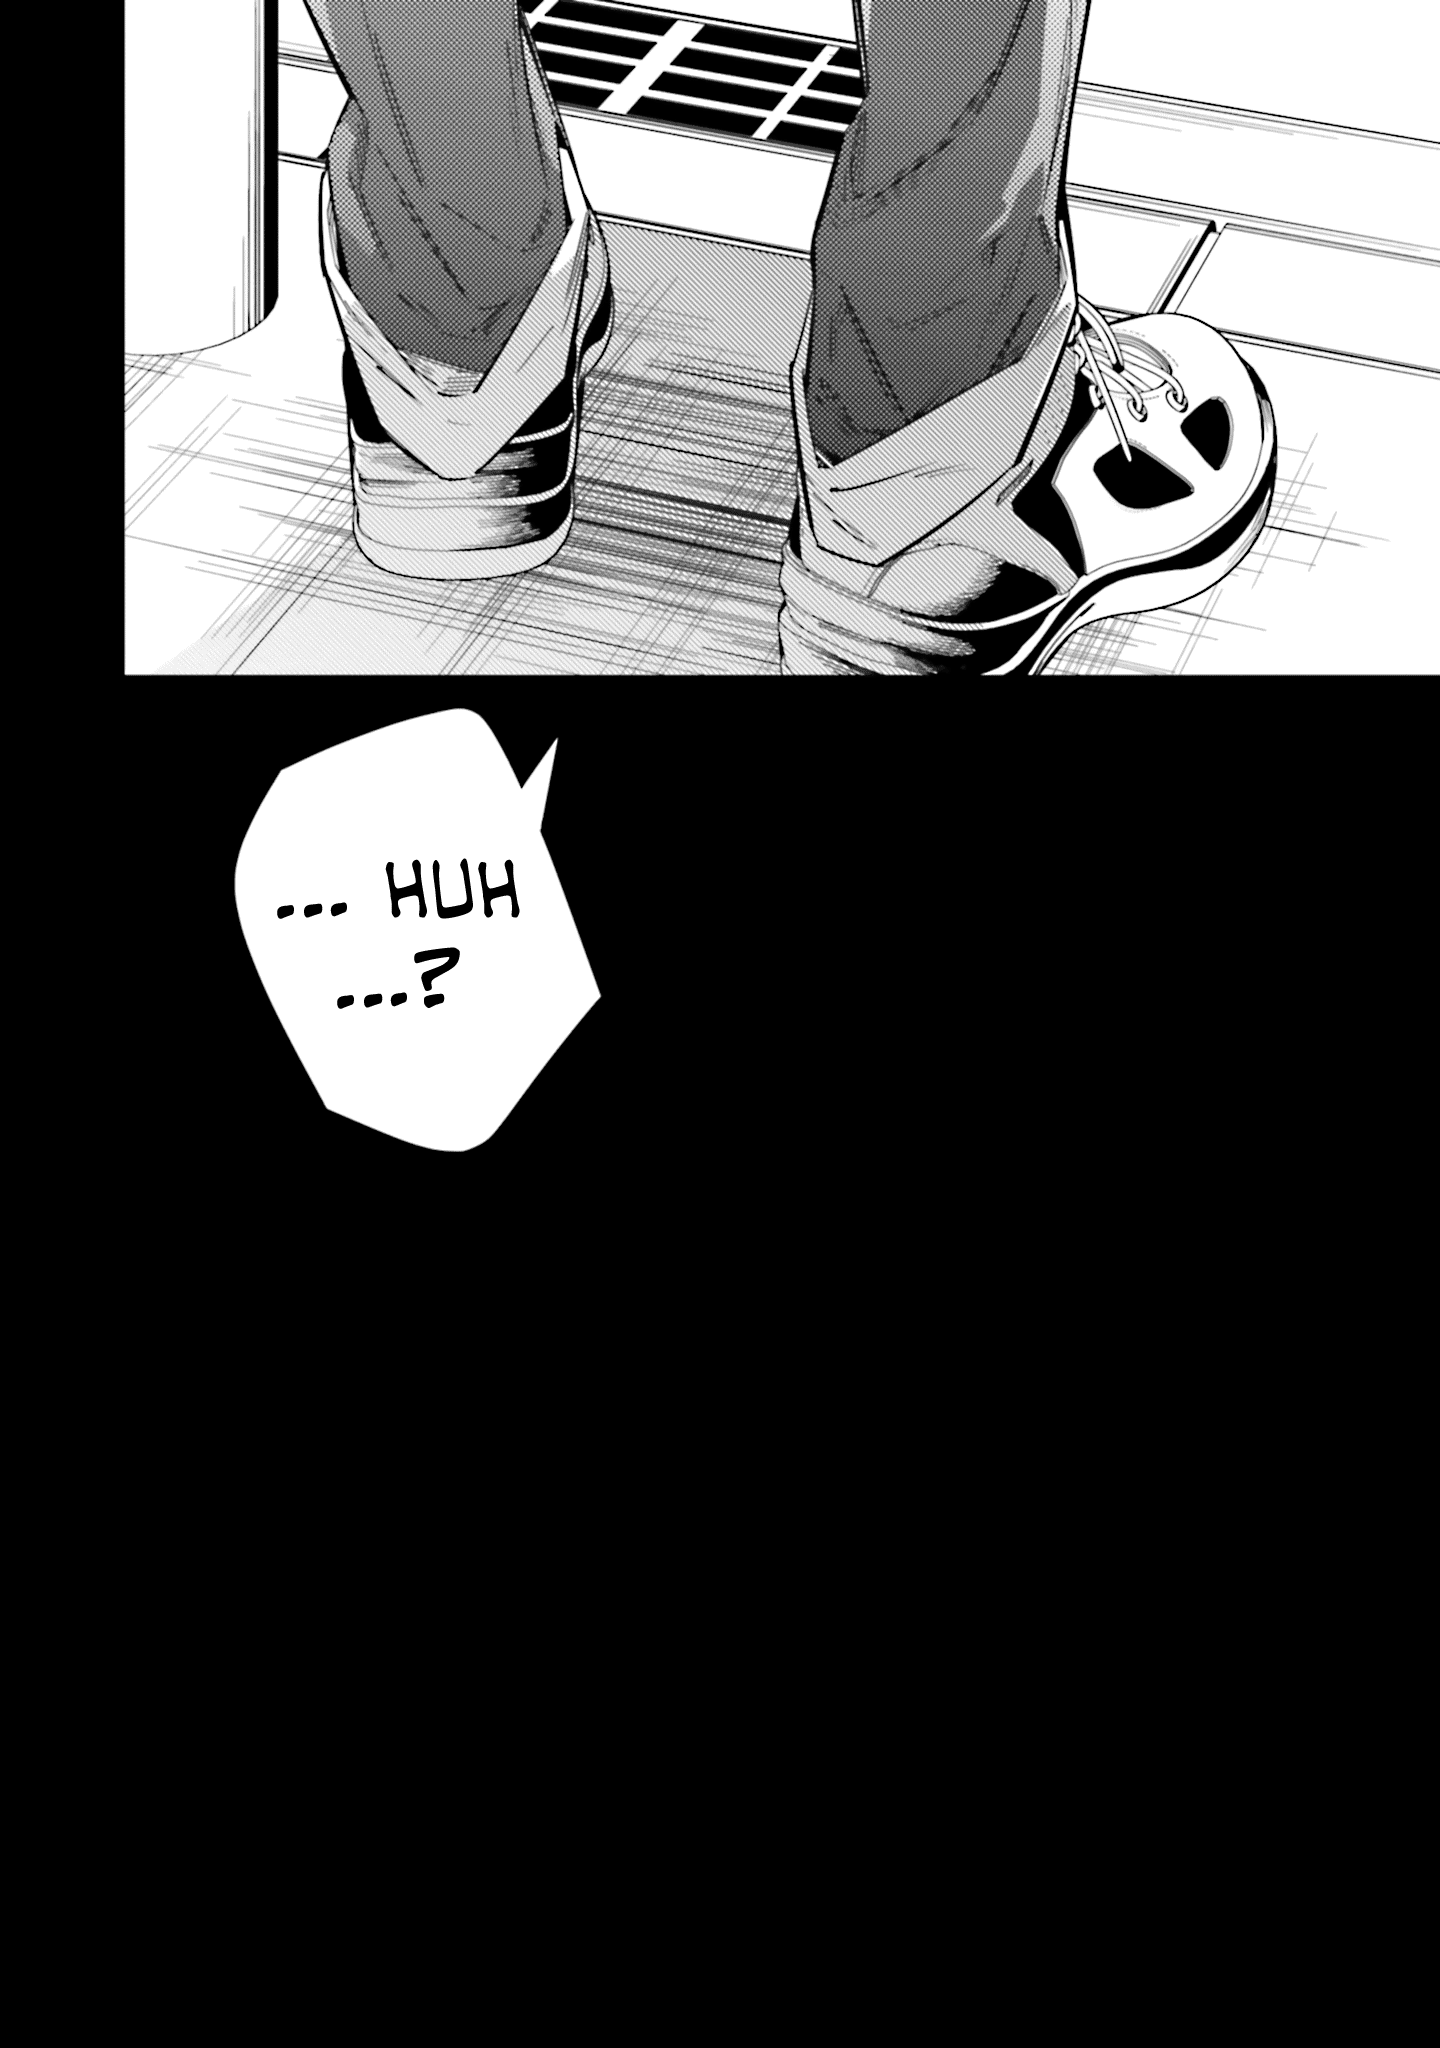 I Reincarnated As The Little Sister Of A Death Game Manga's Murder Mastermind And Failed Chapter 4 #16